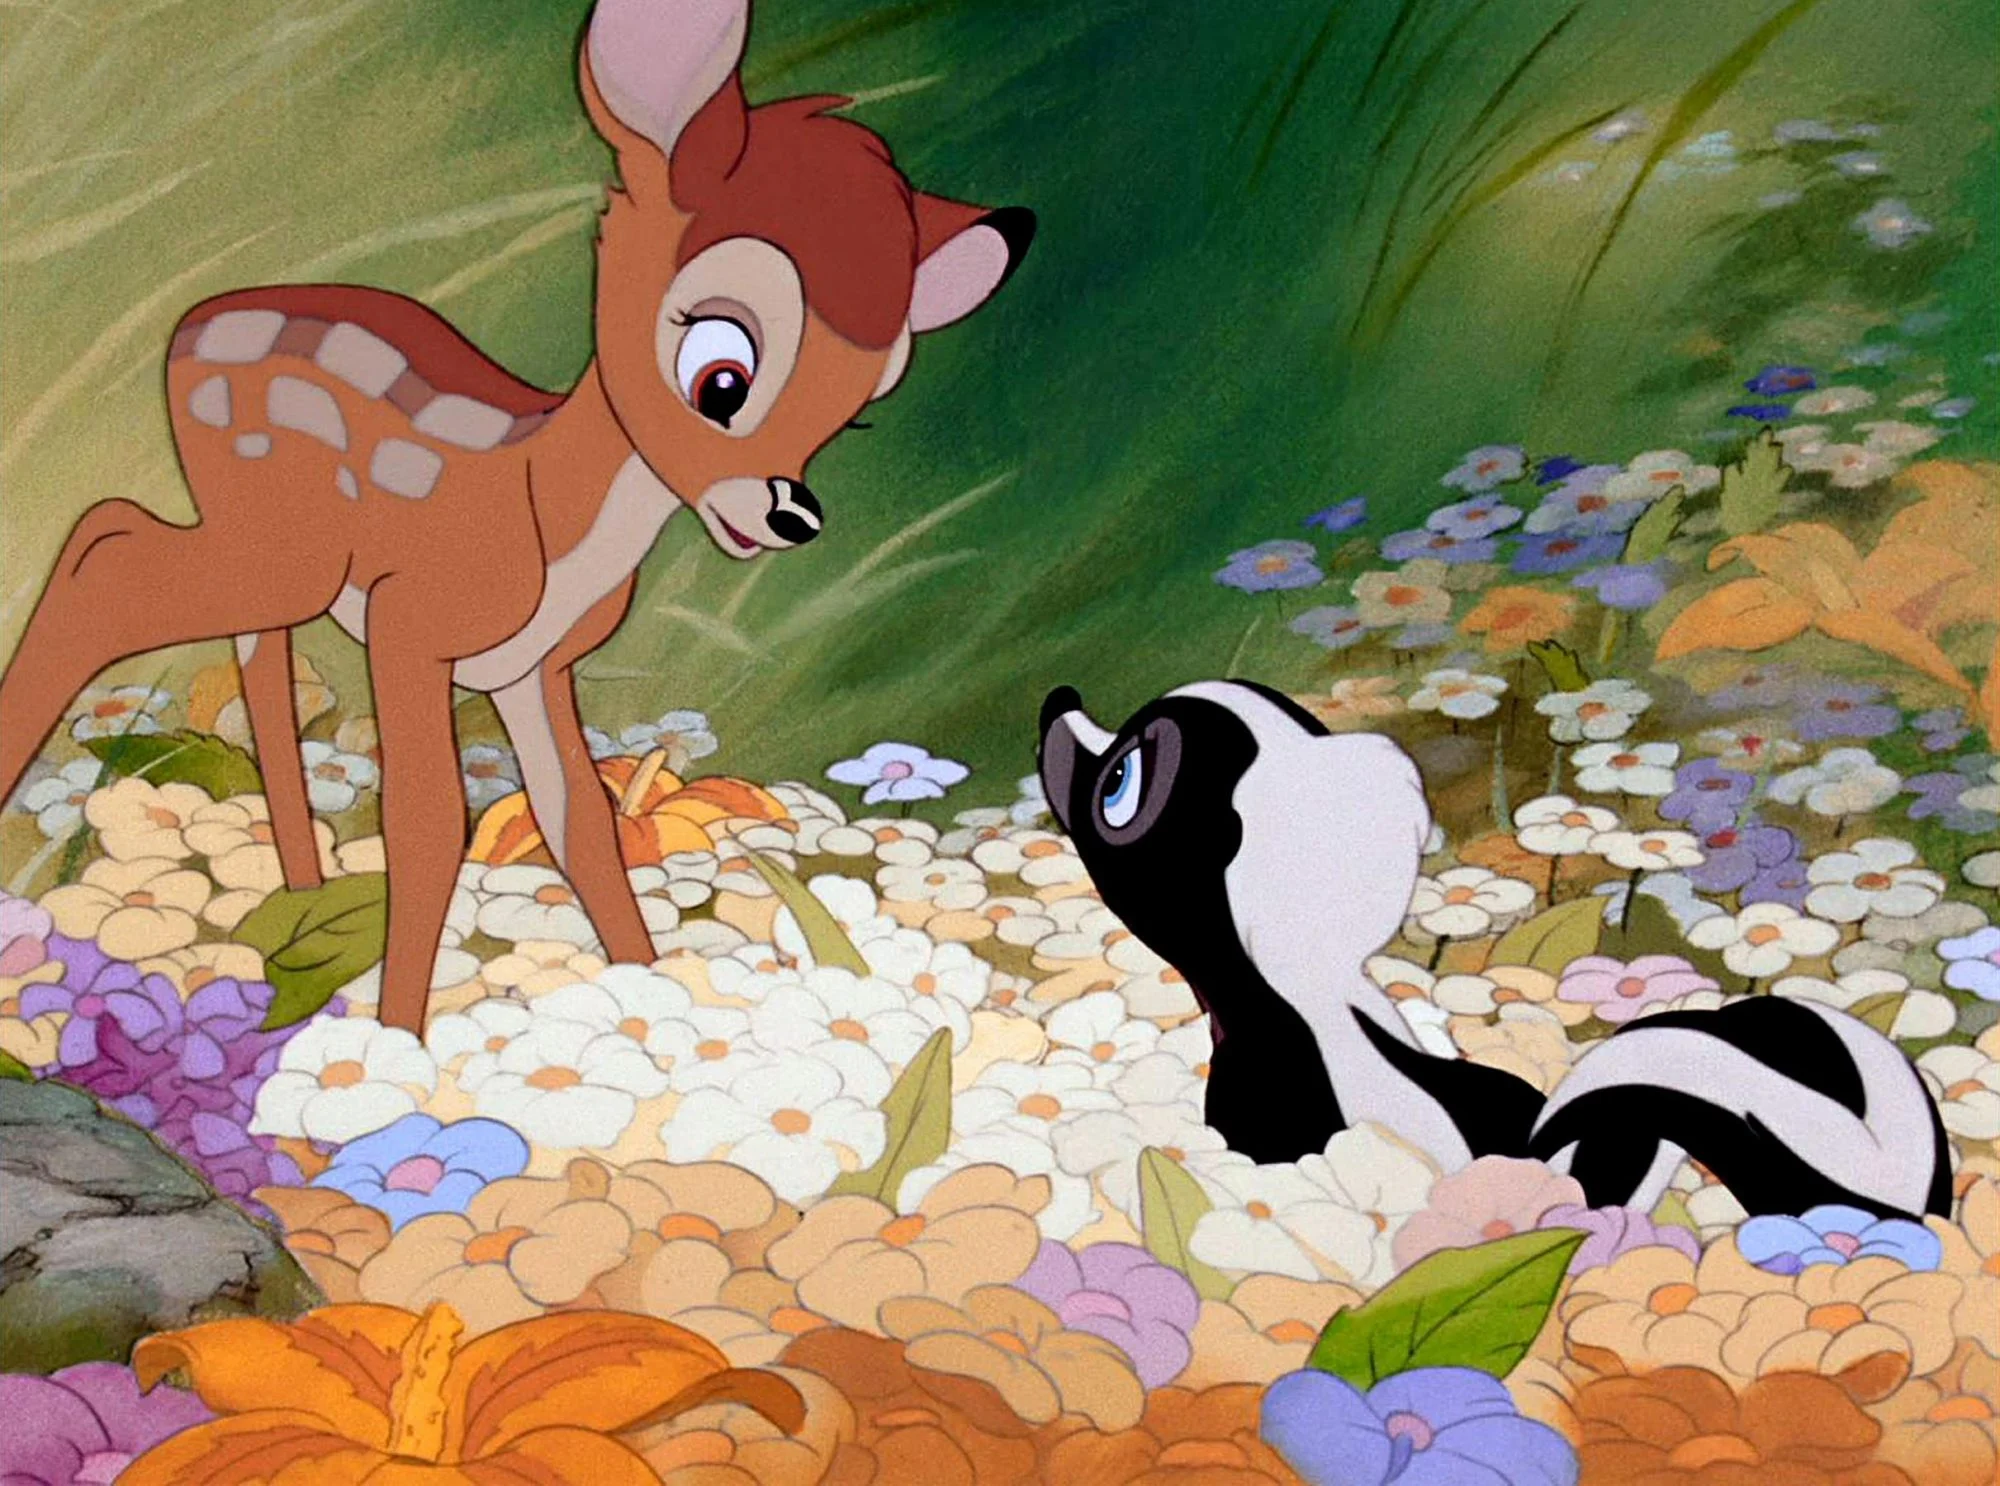 Bambi: The Reckoning - Bambi Horror Movie Currently in Works